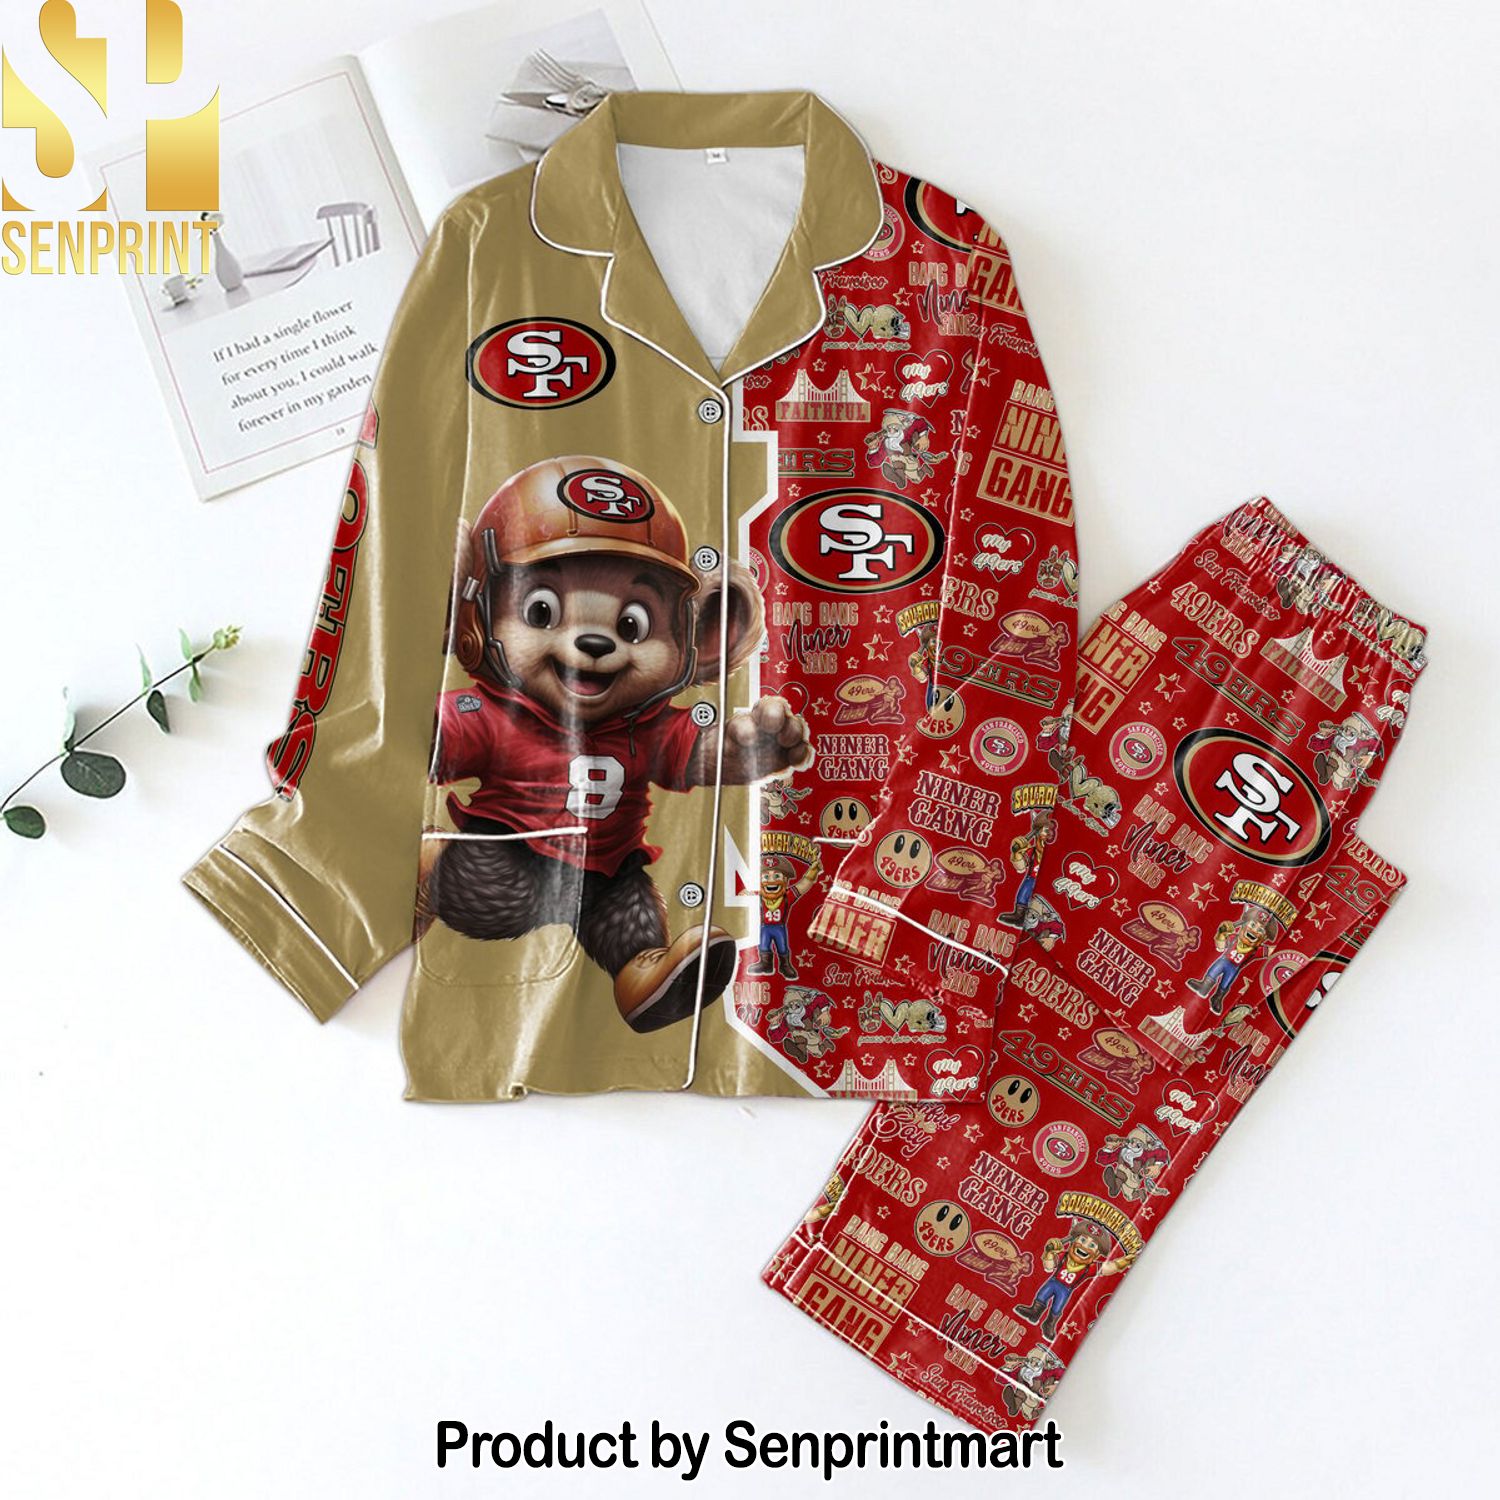 NFL San Francisco 49ers Gift Ideas All Over Printed Pajama Sets